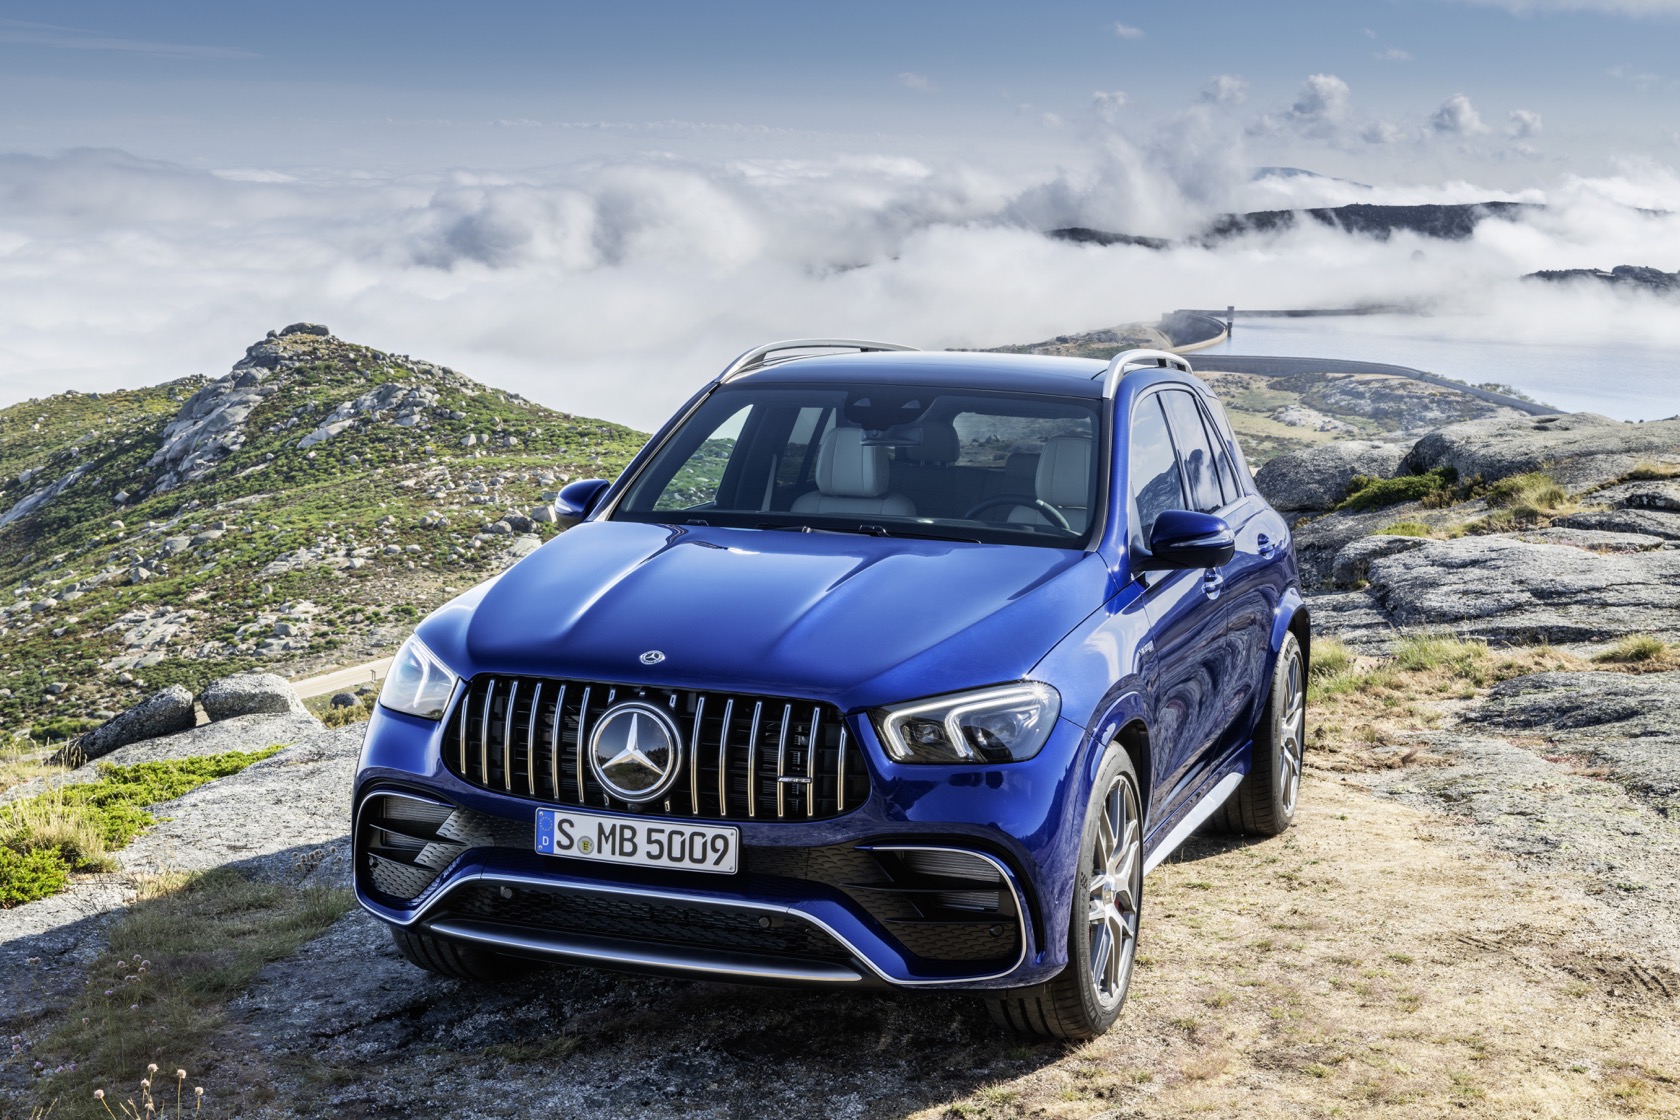 This 21 Mercedes Amg Gle 63 S Is An Suv To Put Sports Cars To Shame Slashgear